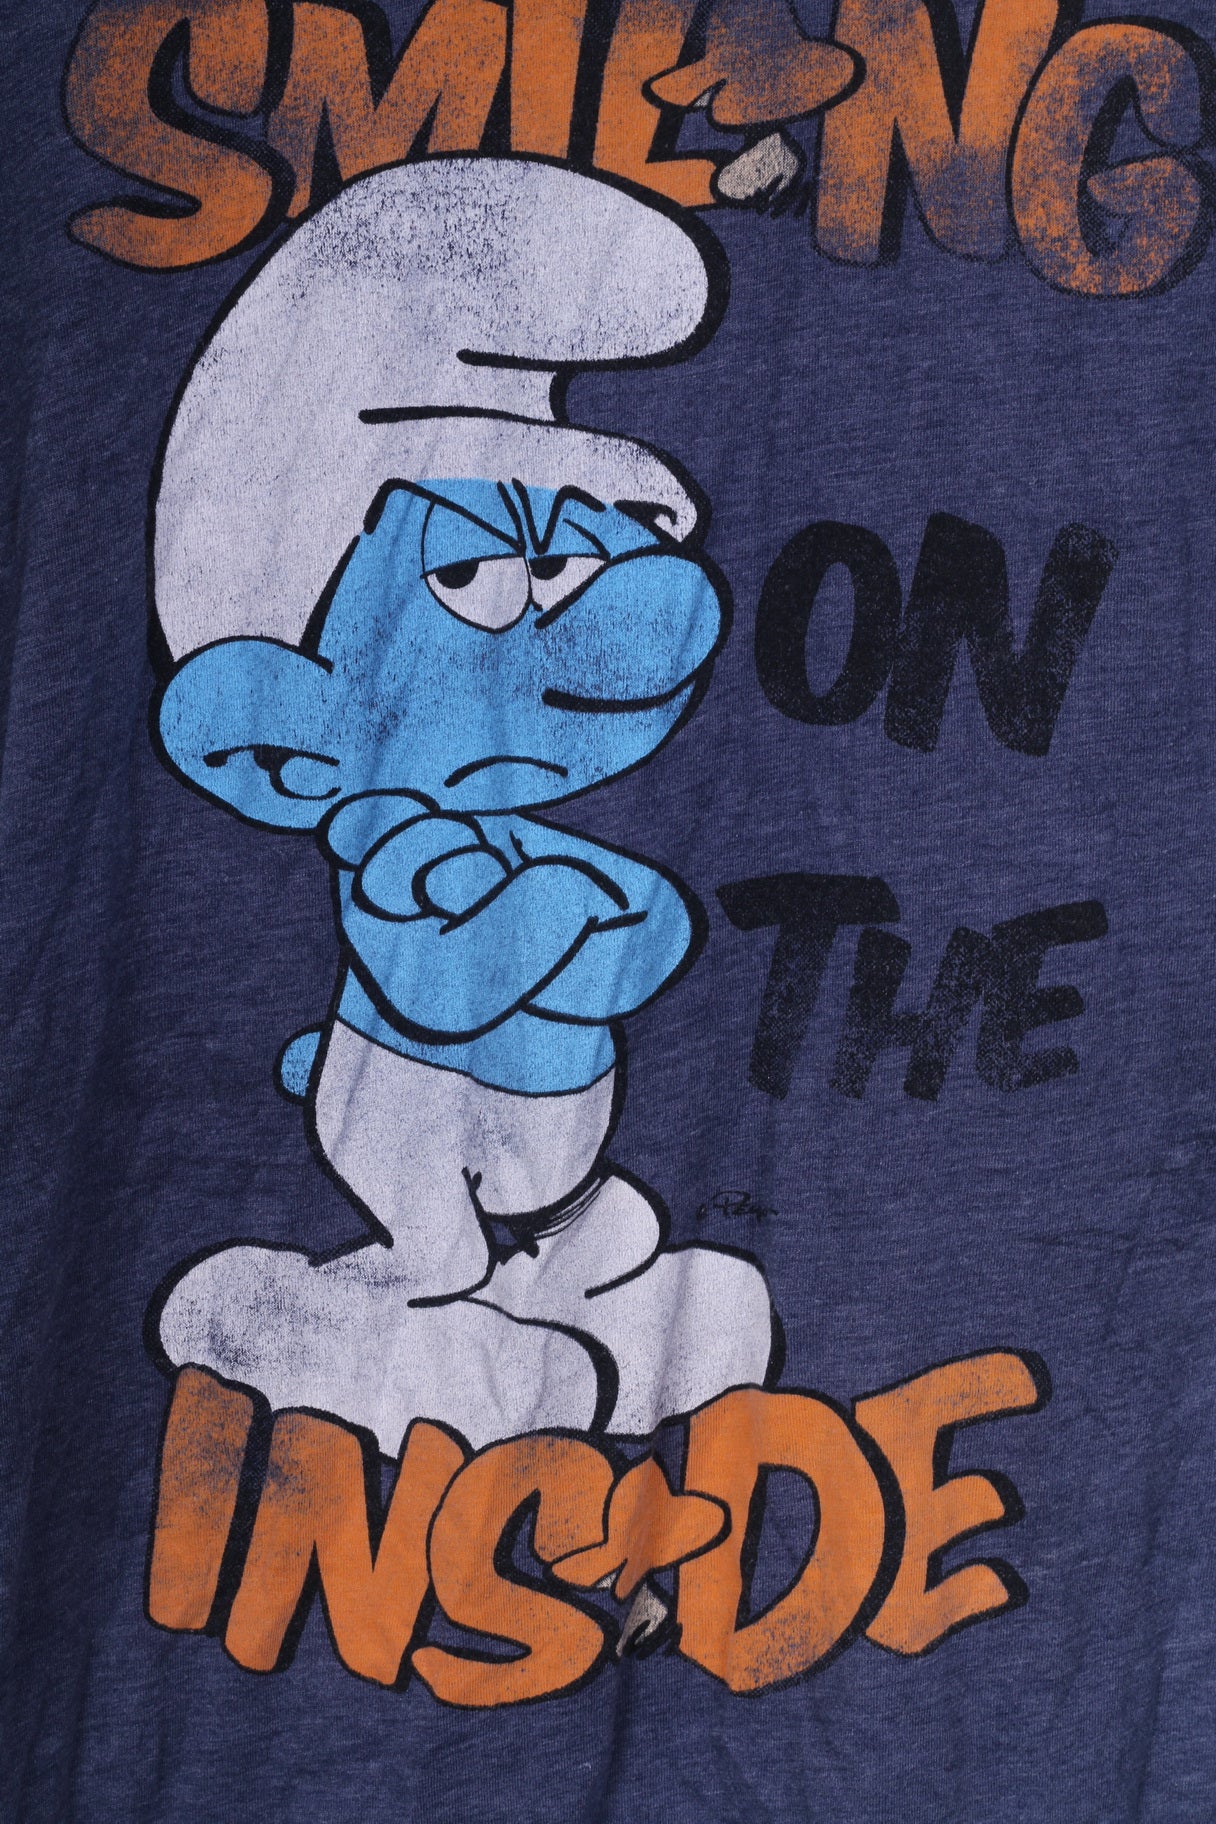 Smiling On The Inside Womens 14 L Shirt Graphic  Smurfs Blue Cotton